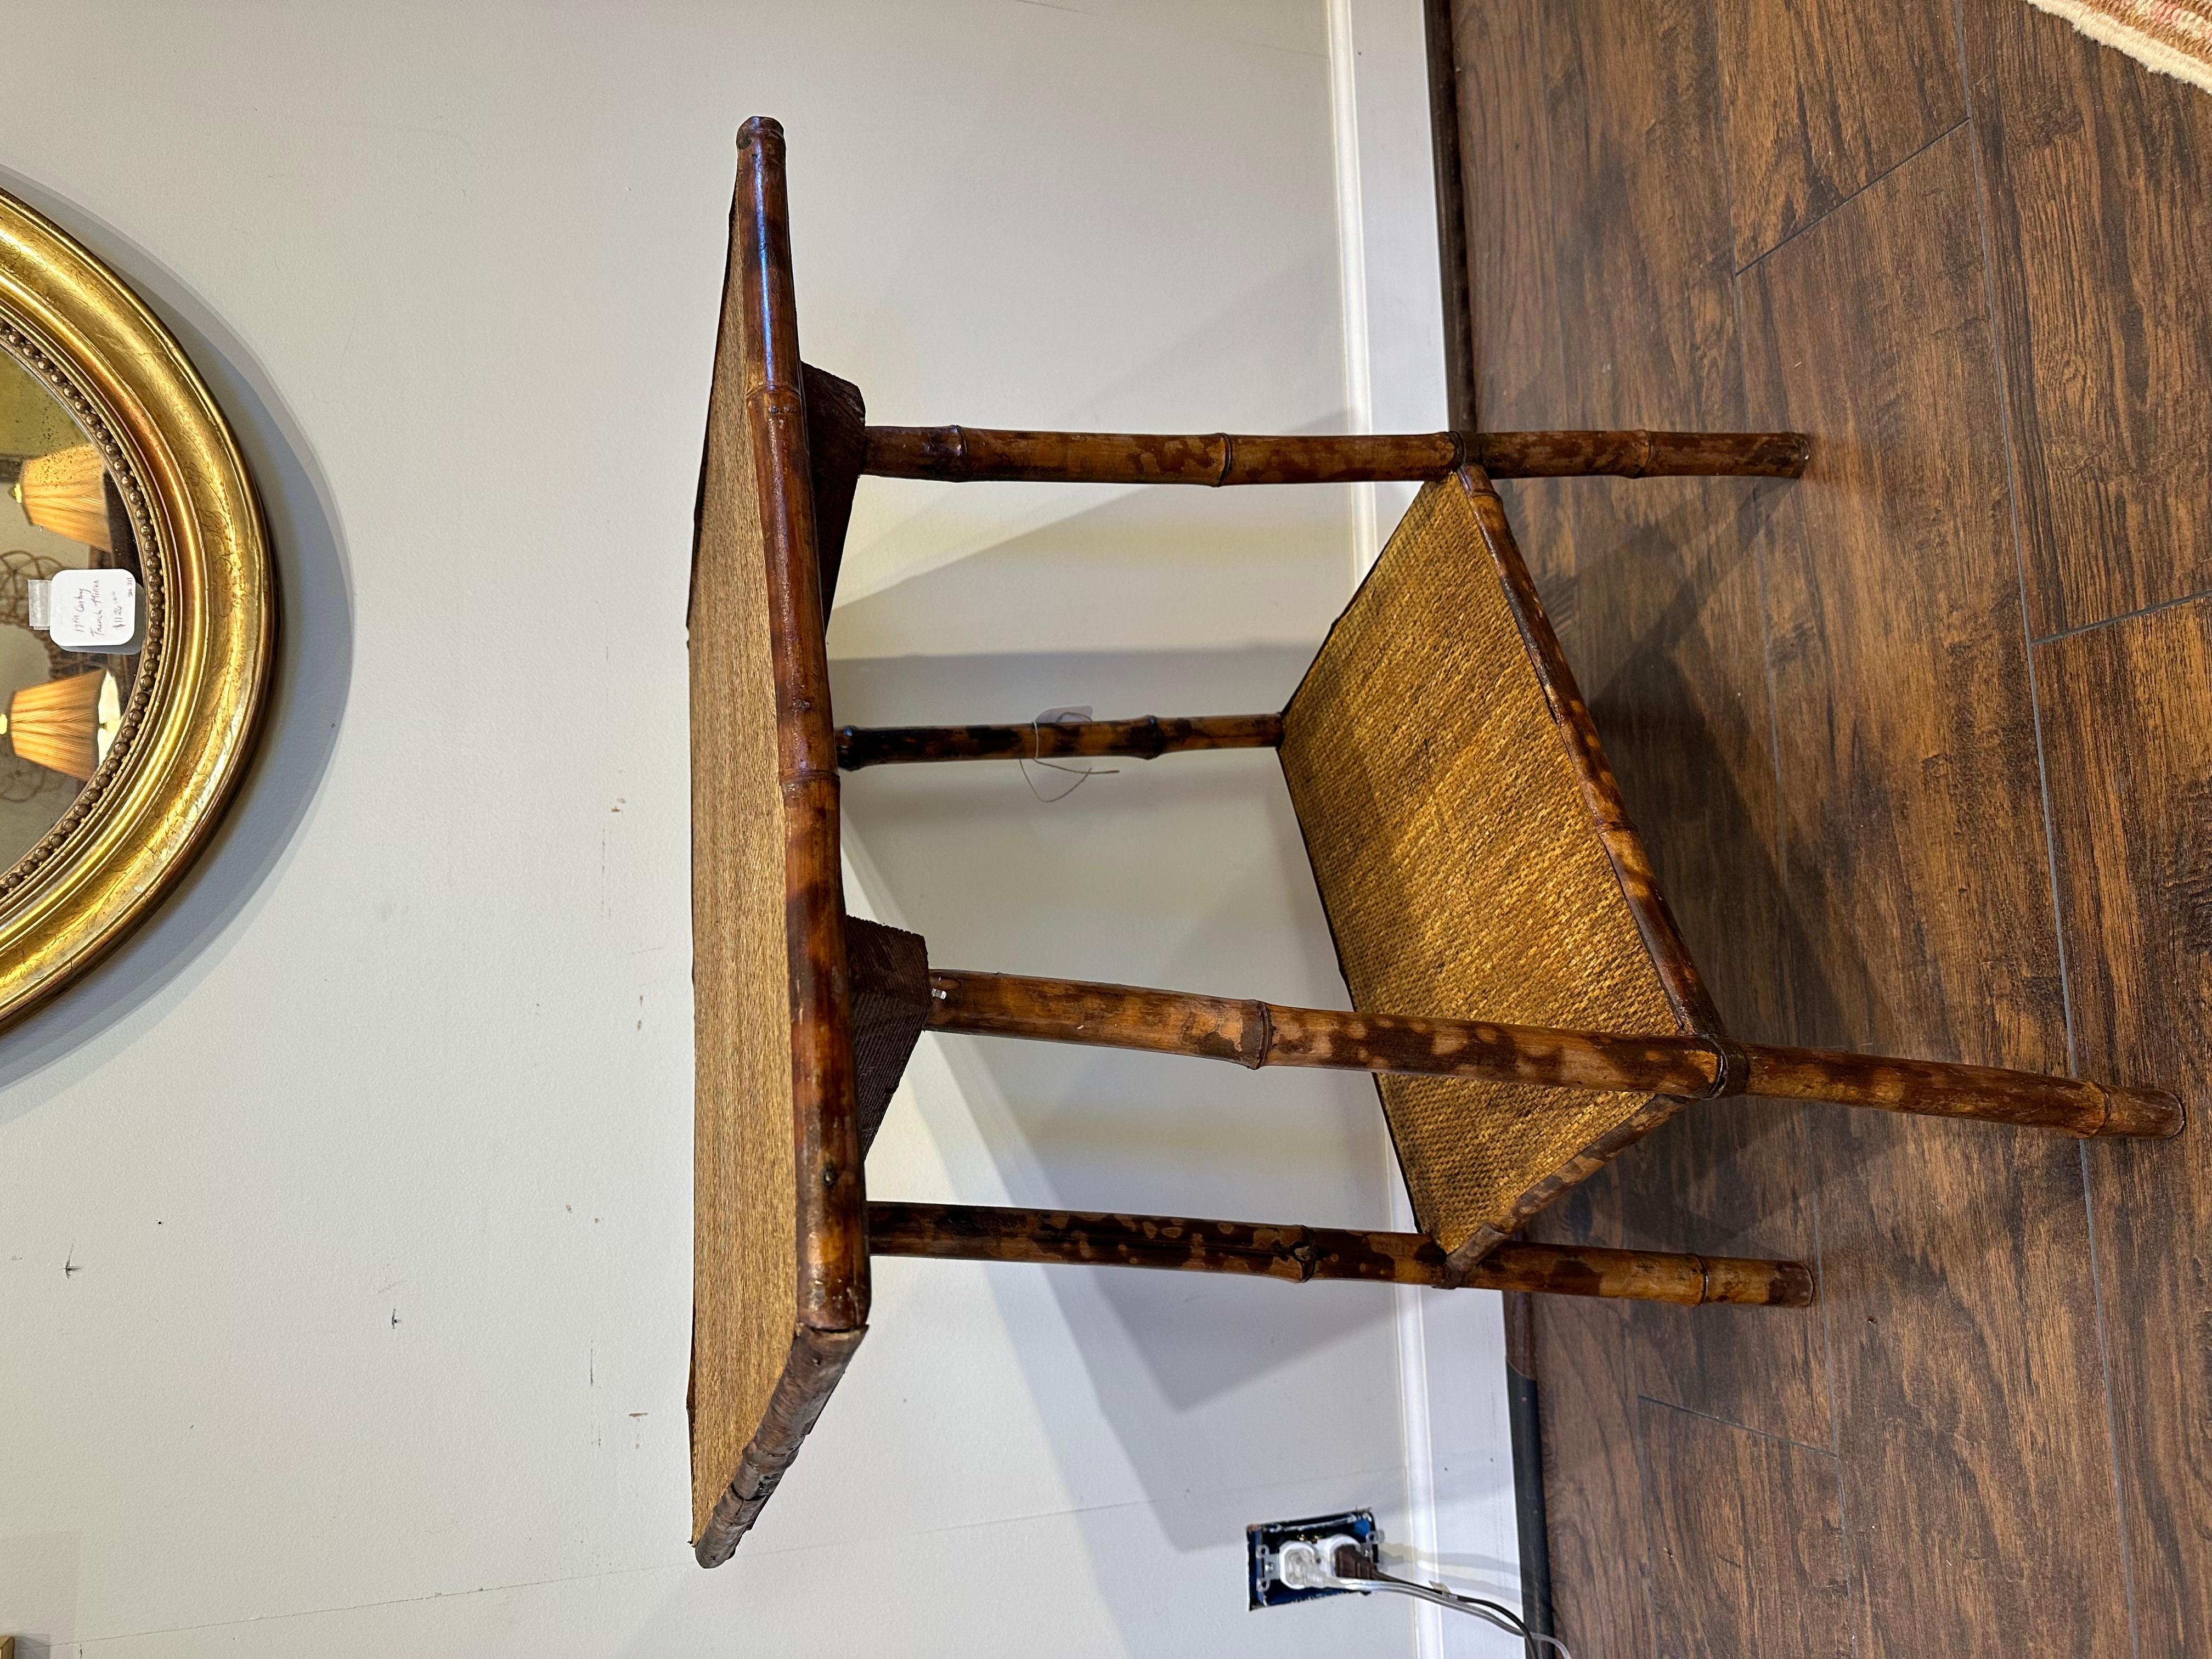 eautiful 19th Century English bamboo side table! There is lovely natural design and detail in the bamboo wood, and the colors and style make this a perfect transitional piece that would go well any room! 
